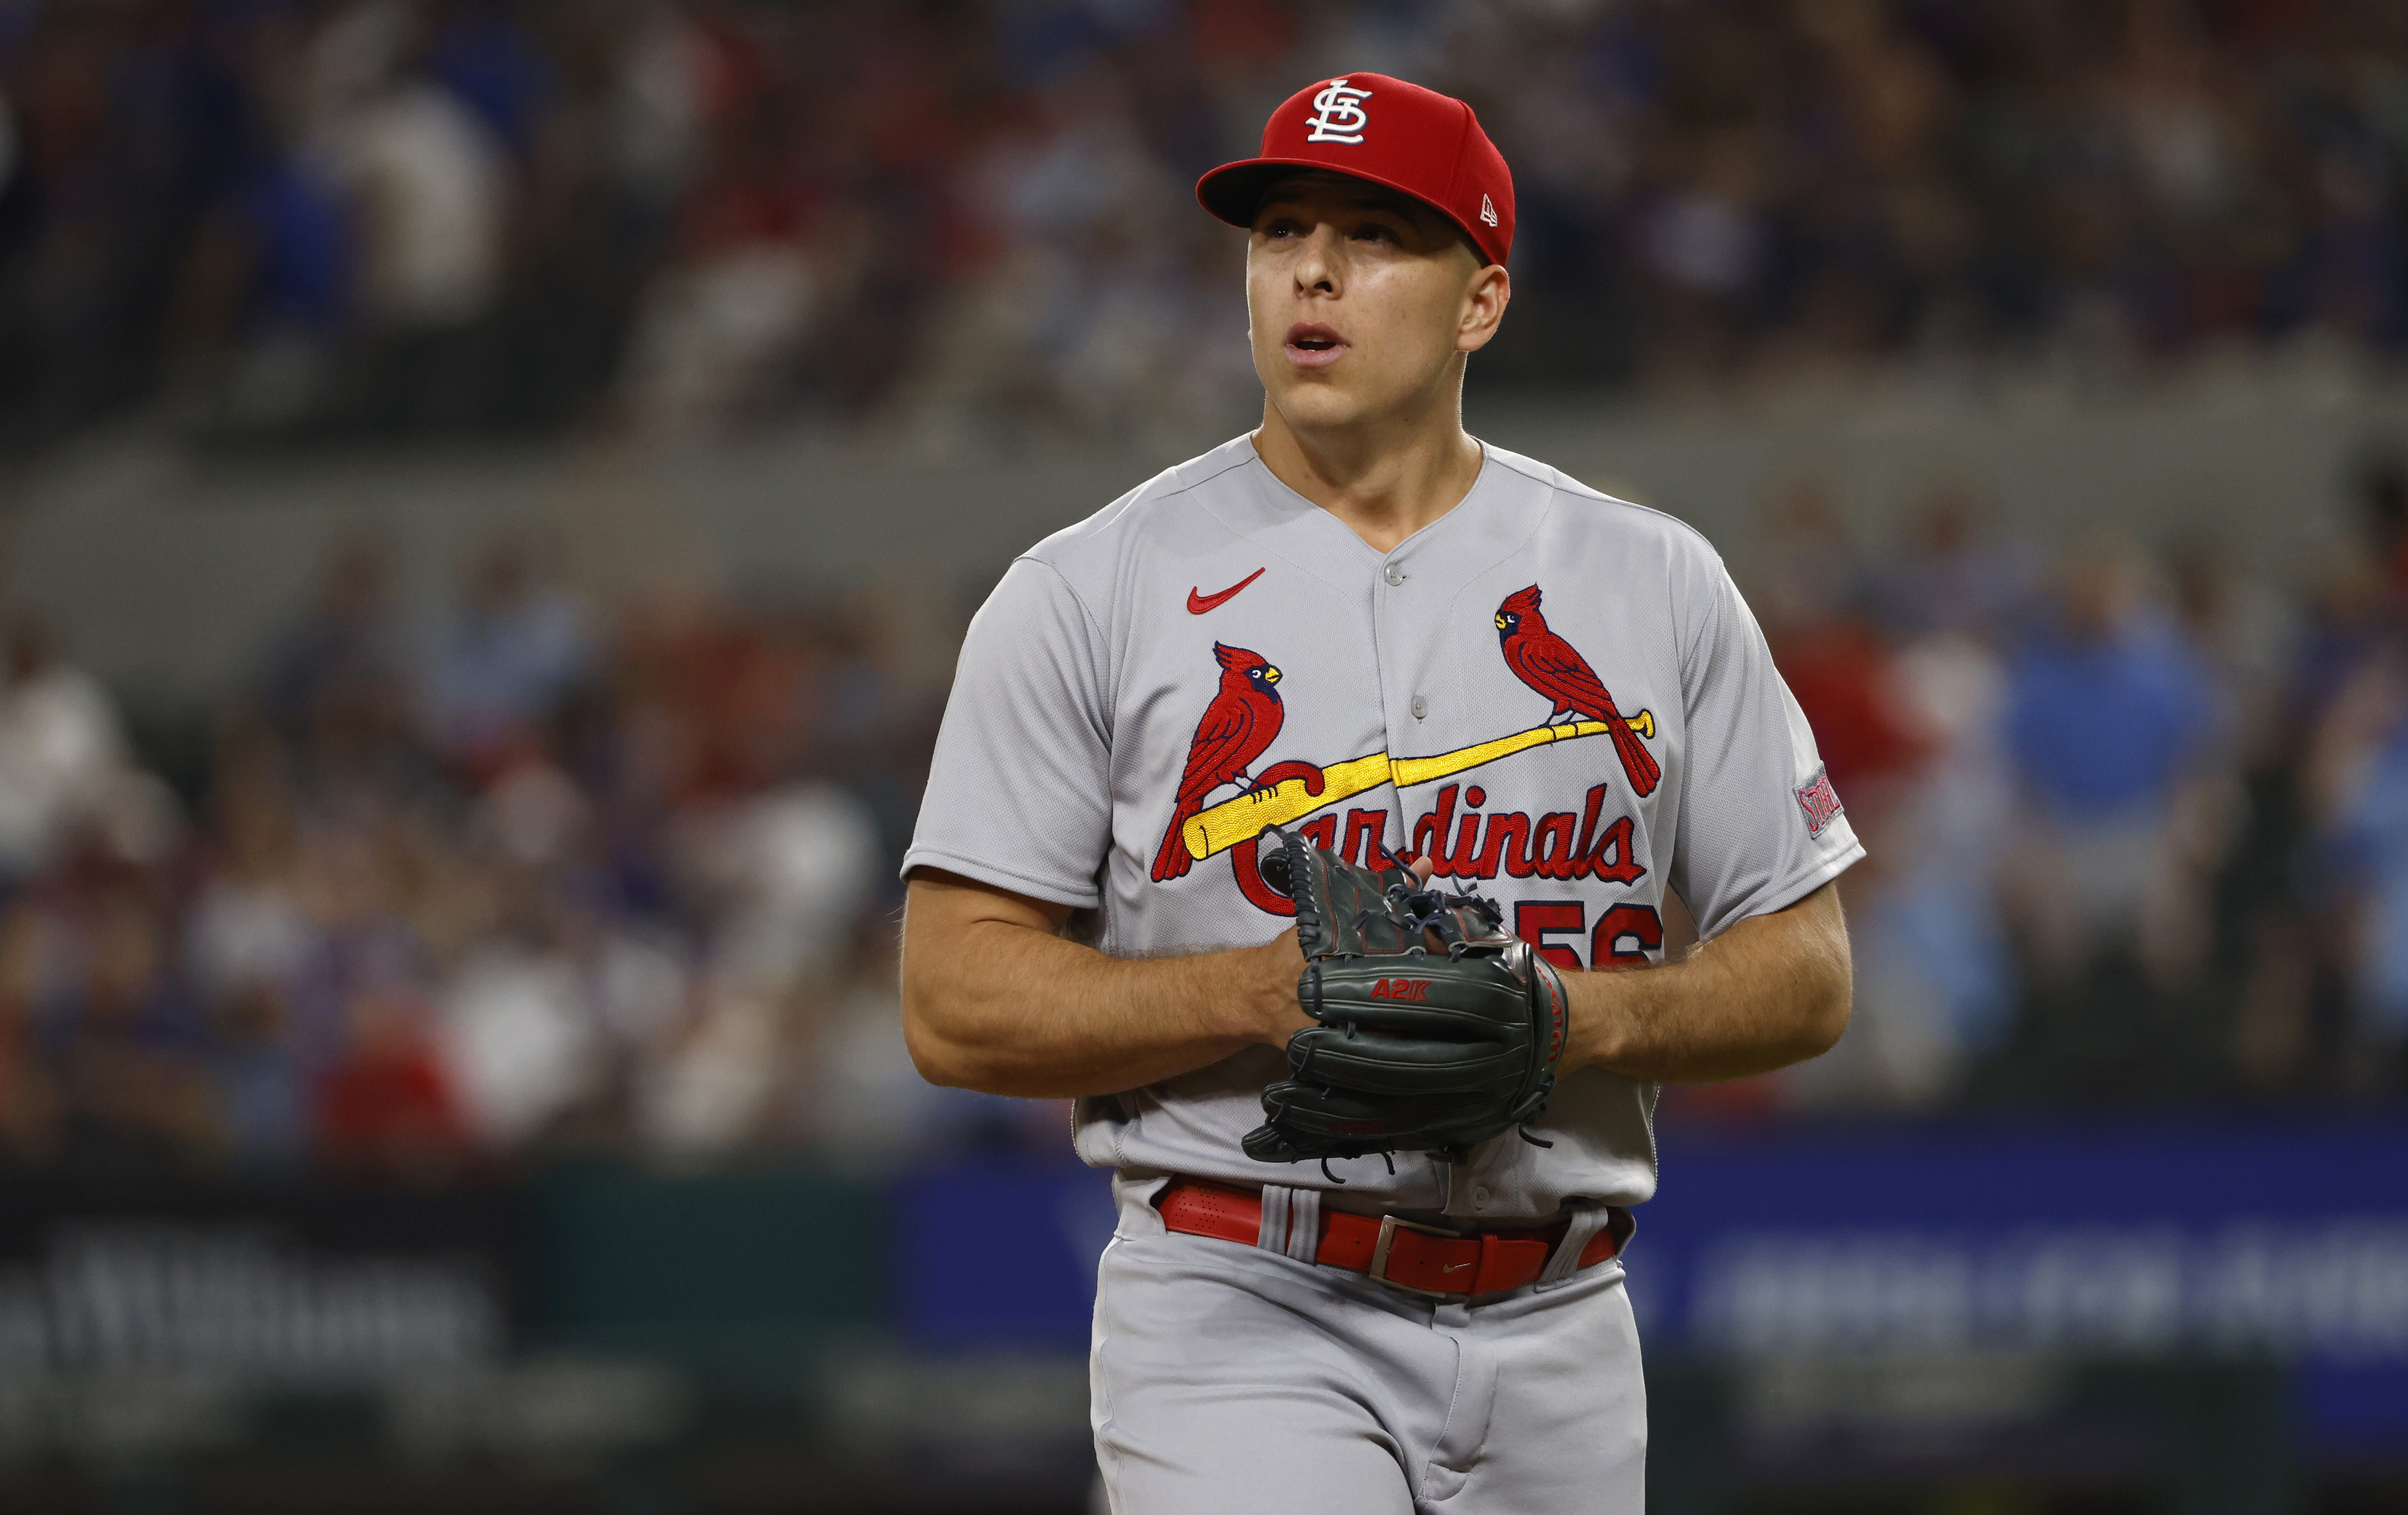 Cardinals closer Helsley reportedly still not close to returning from IL